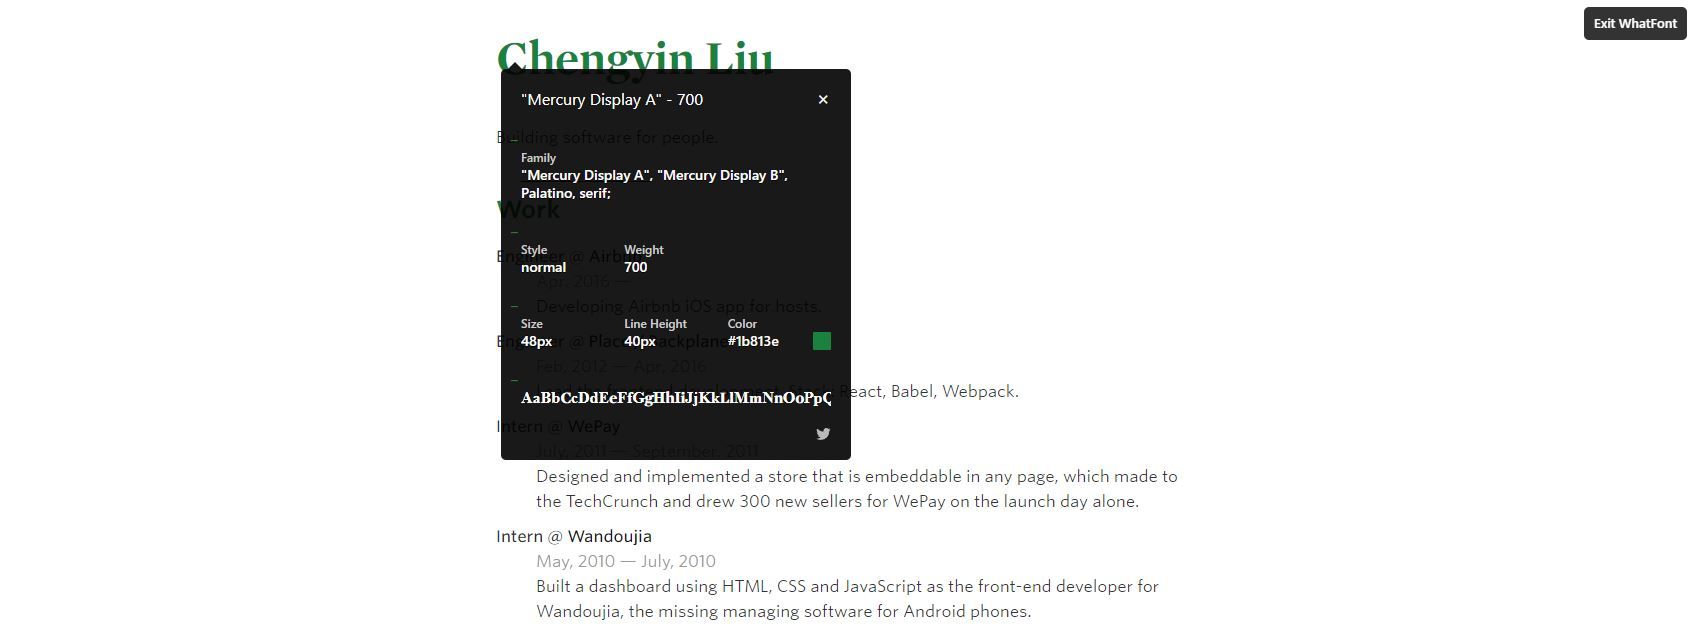 A Screenshot of the WhatFont Extension in Use